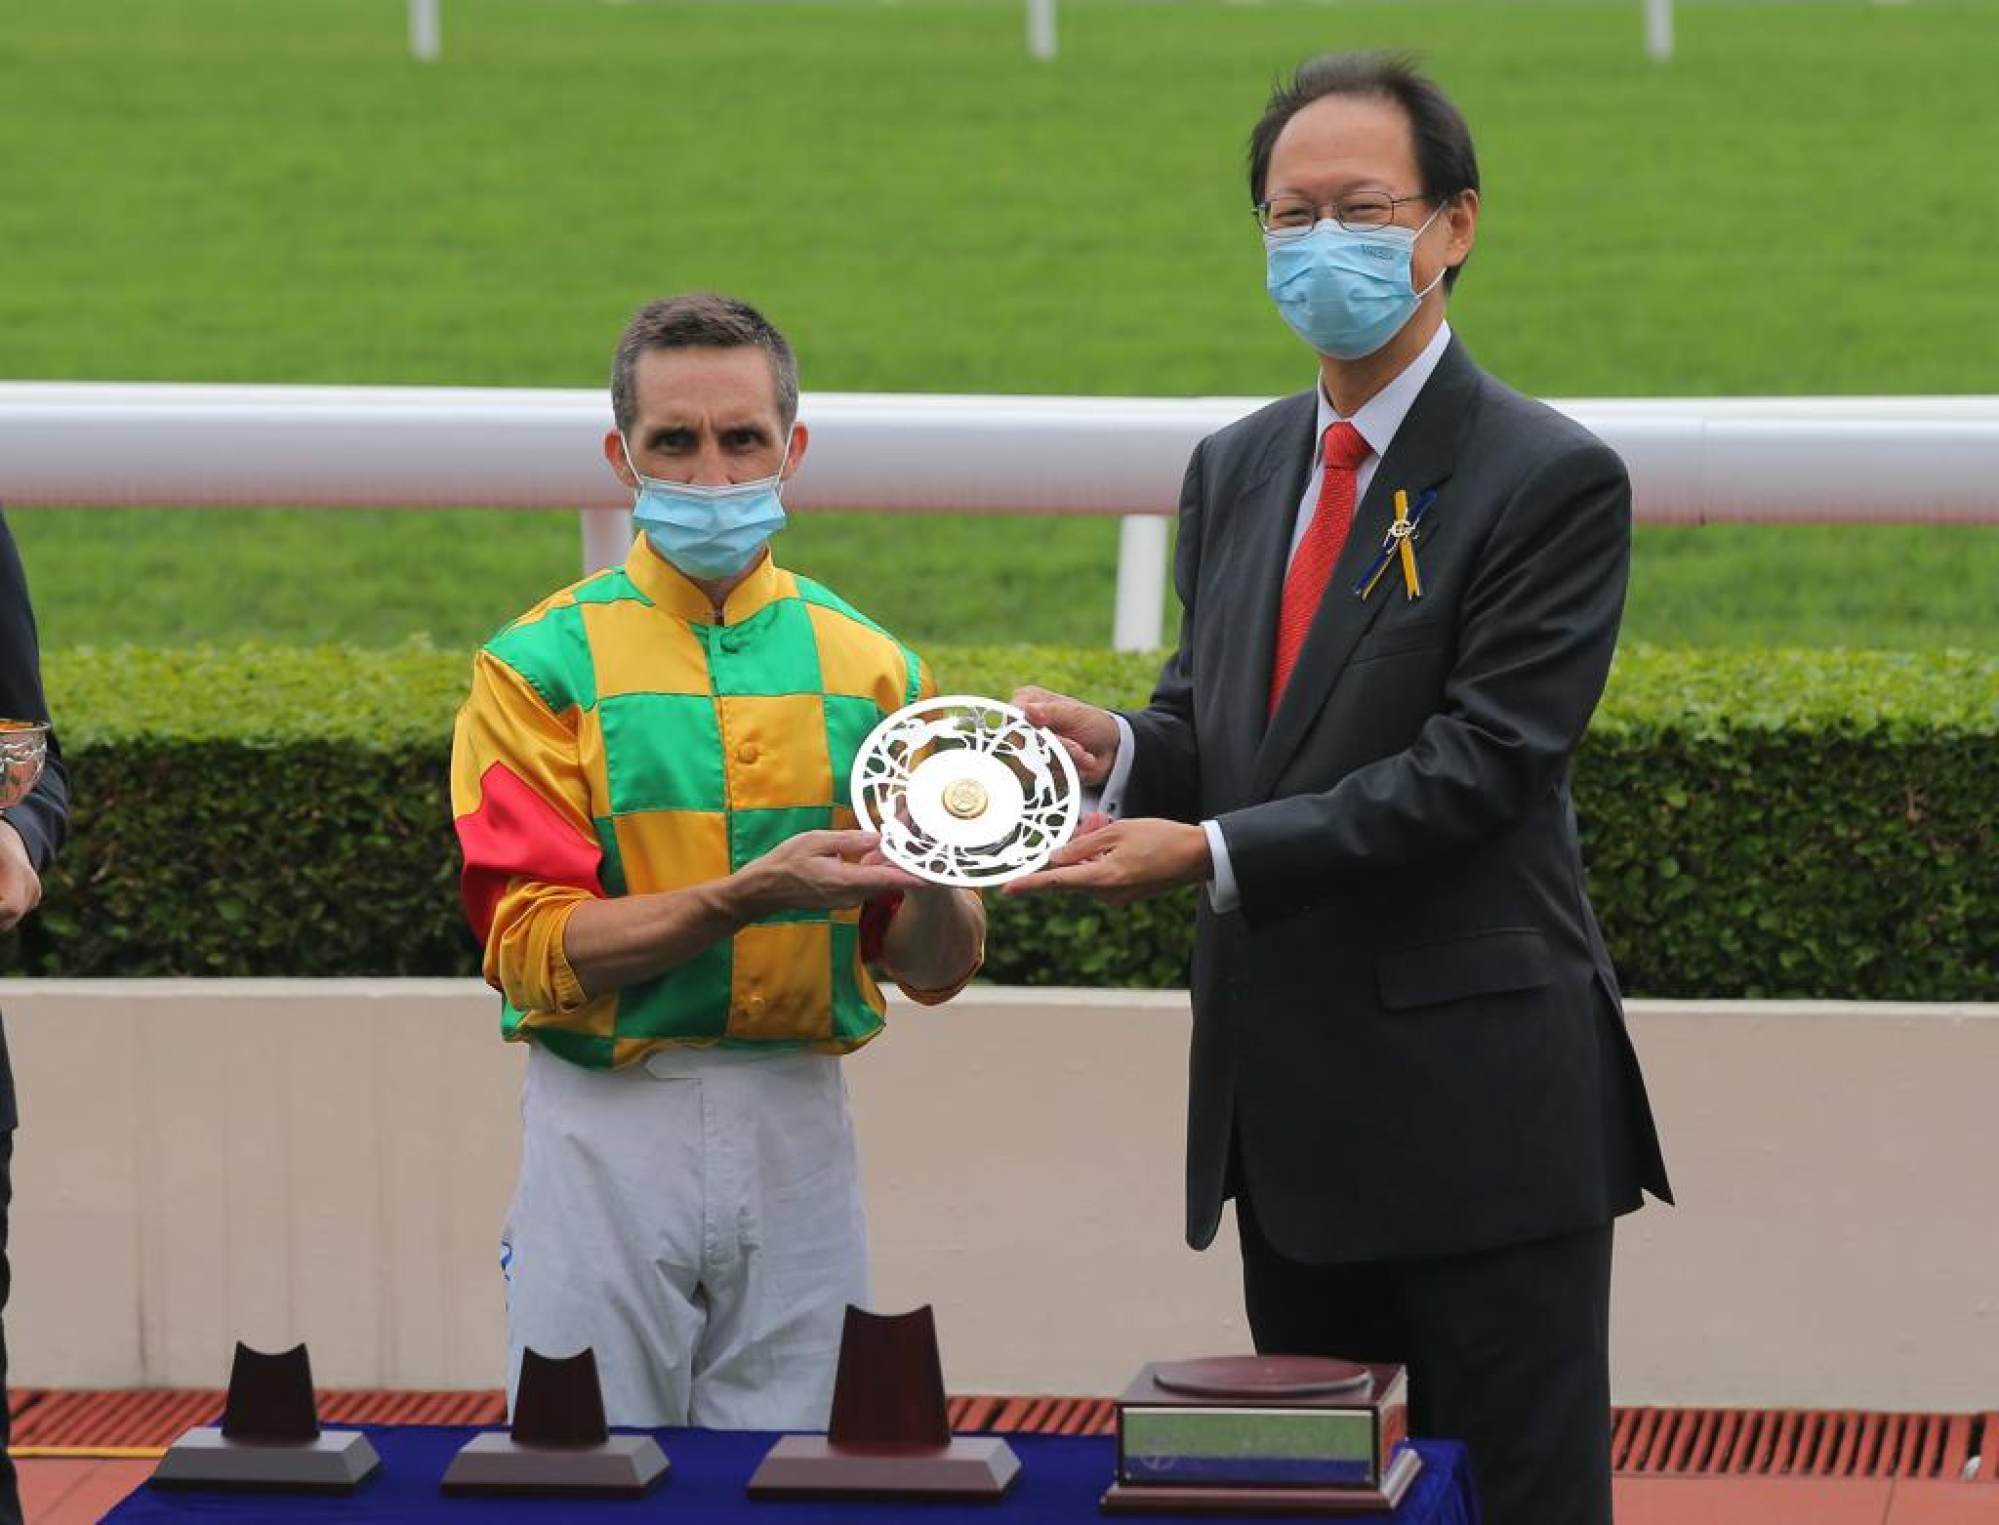 Jockey Club chairman Philip Chen presents Neil Callan with his prize for winning the Chairman’s Trophy with Mighty Giant on Monday.